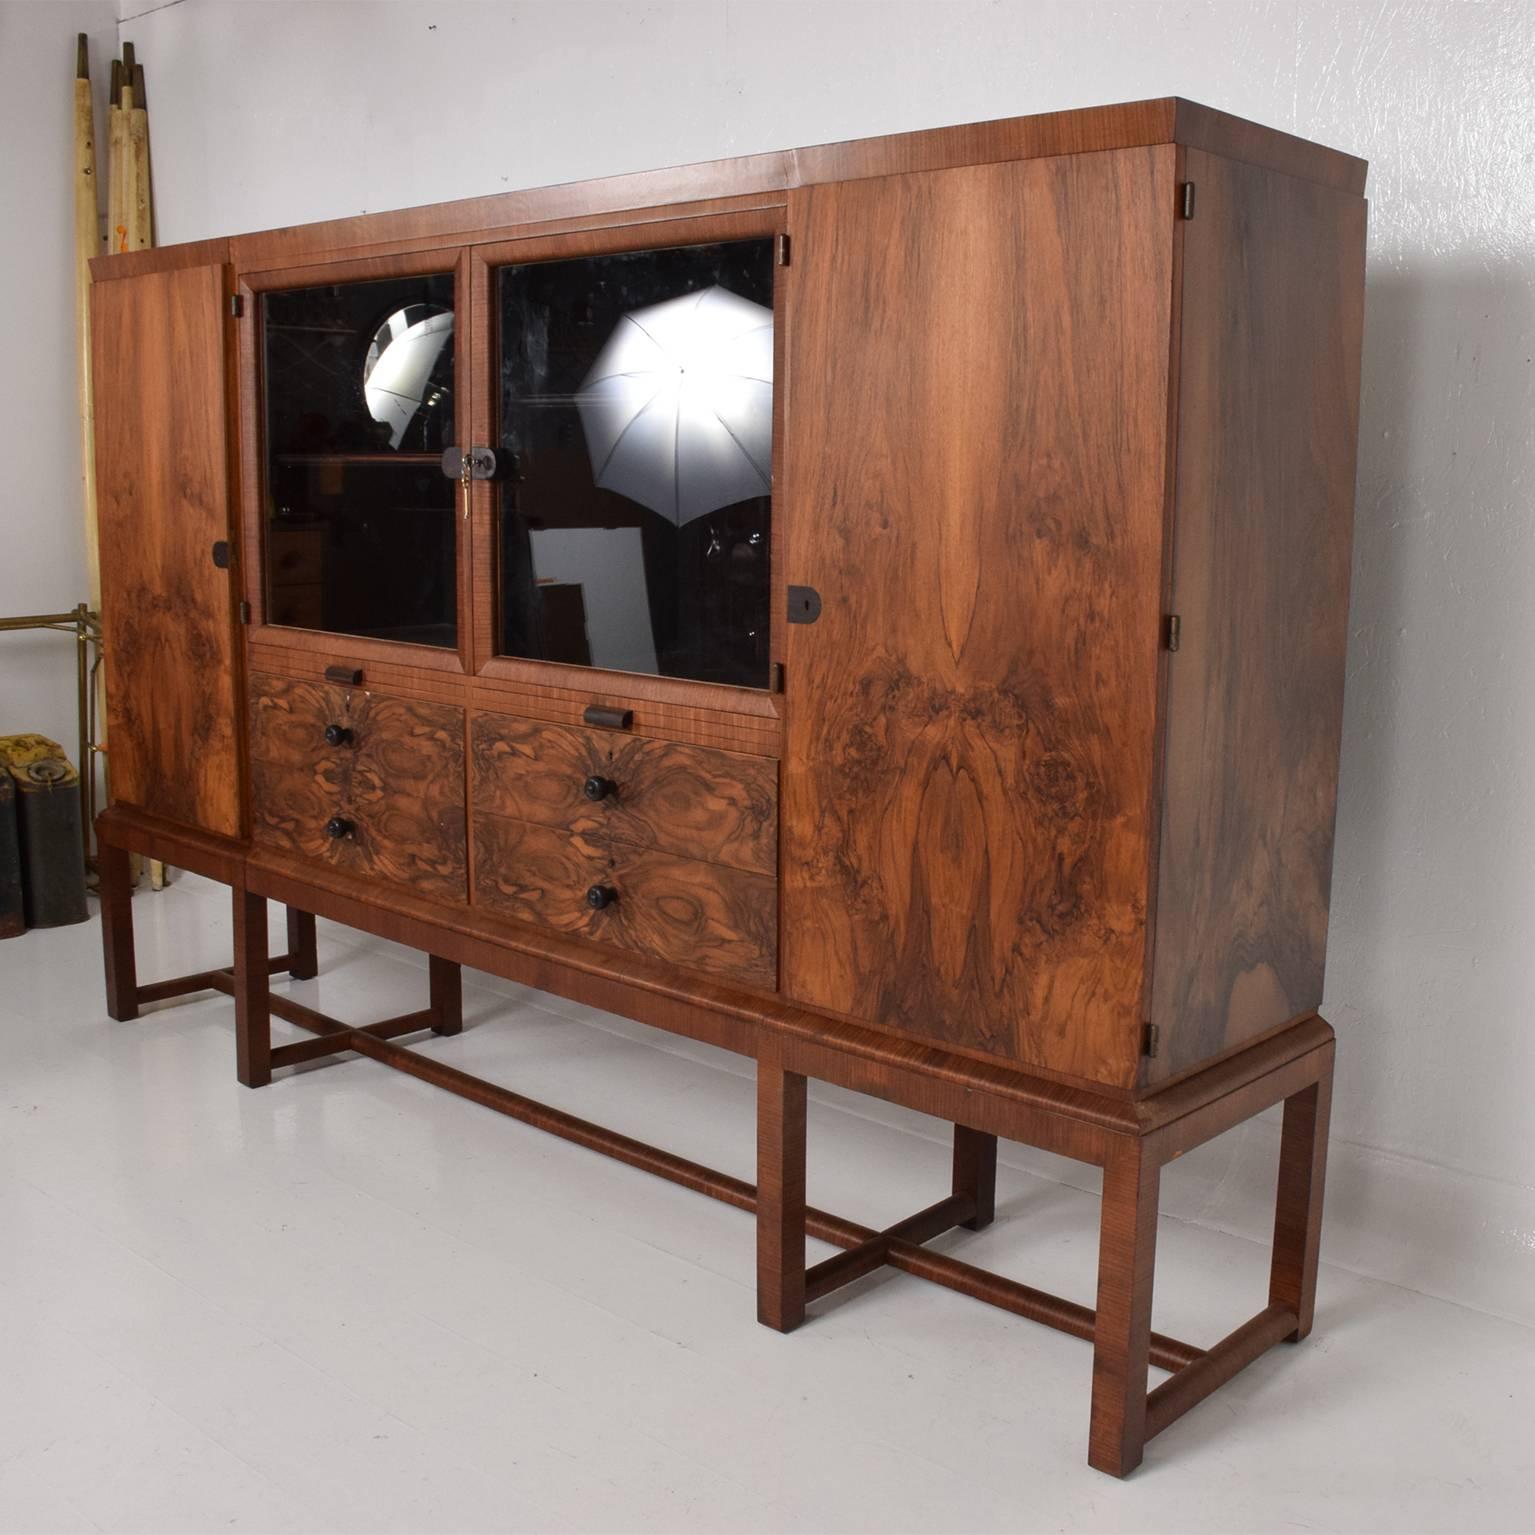 For your consideration an Art Deco cabinet designed by Bruno Paul for Deutsche Werkstätten Hellerau GmbH, Germany, 1920s. Iconic furniture from the Bauhaus period.
Beautiful craftsmanship featuring four section with storage, adjustable shelves, four